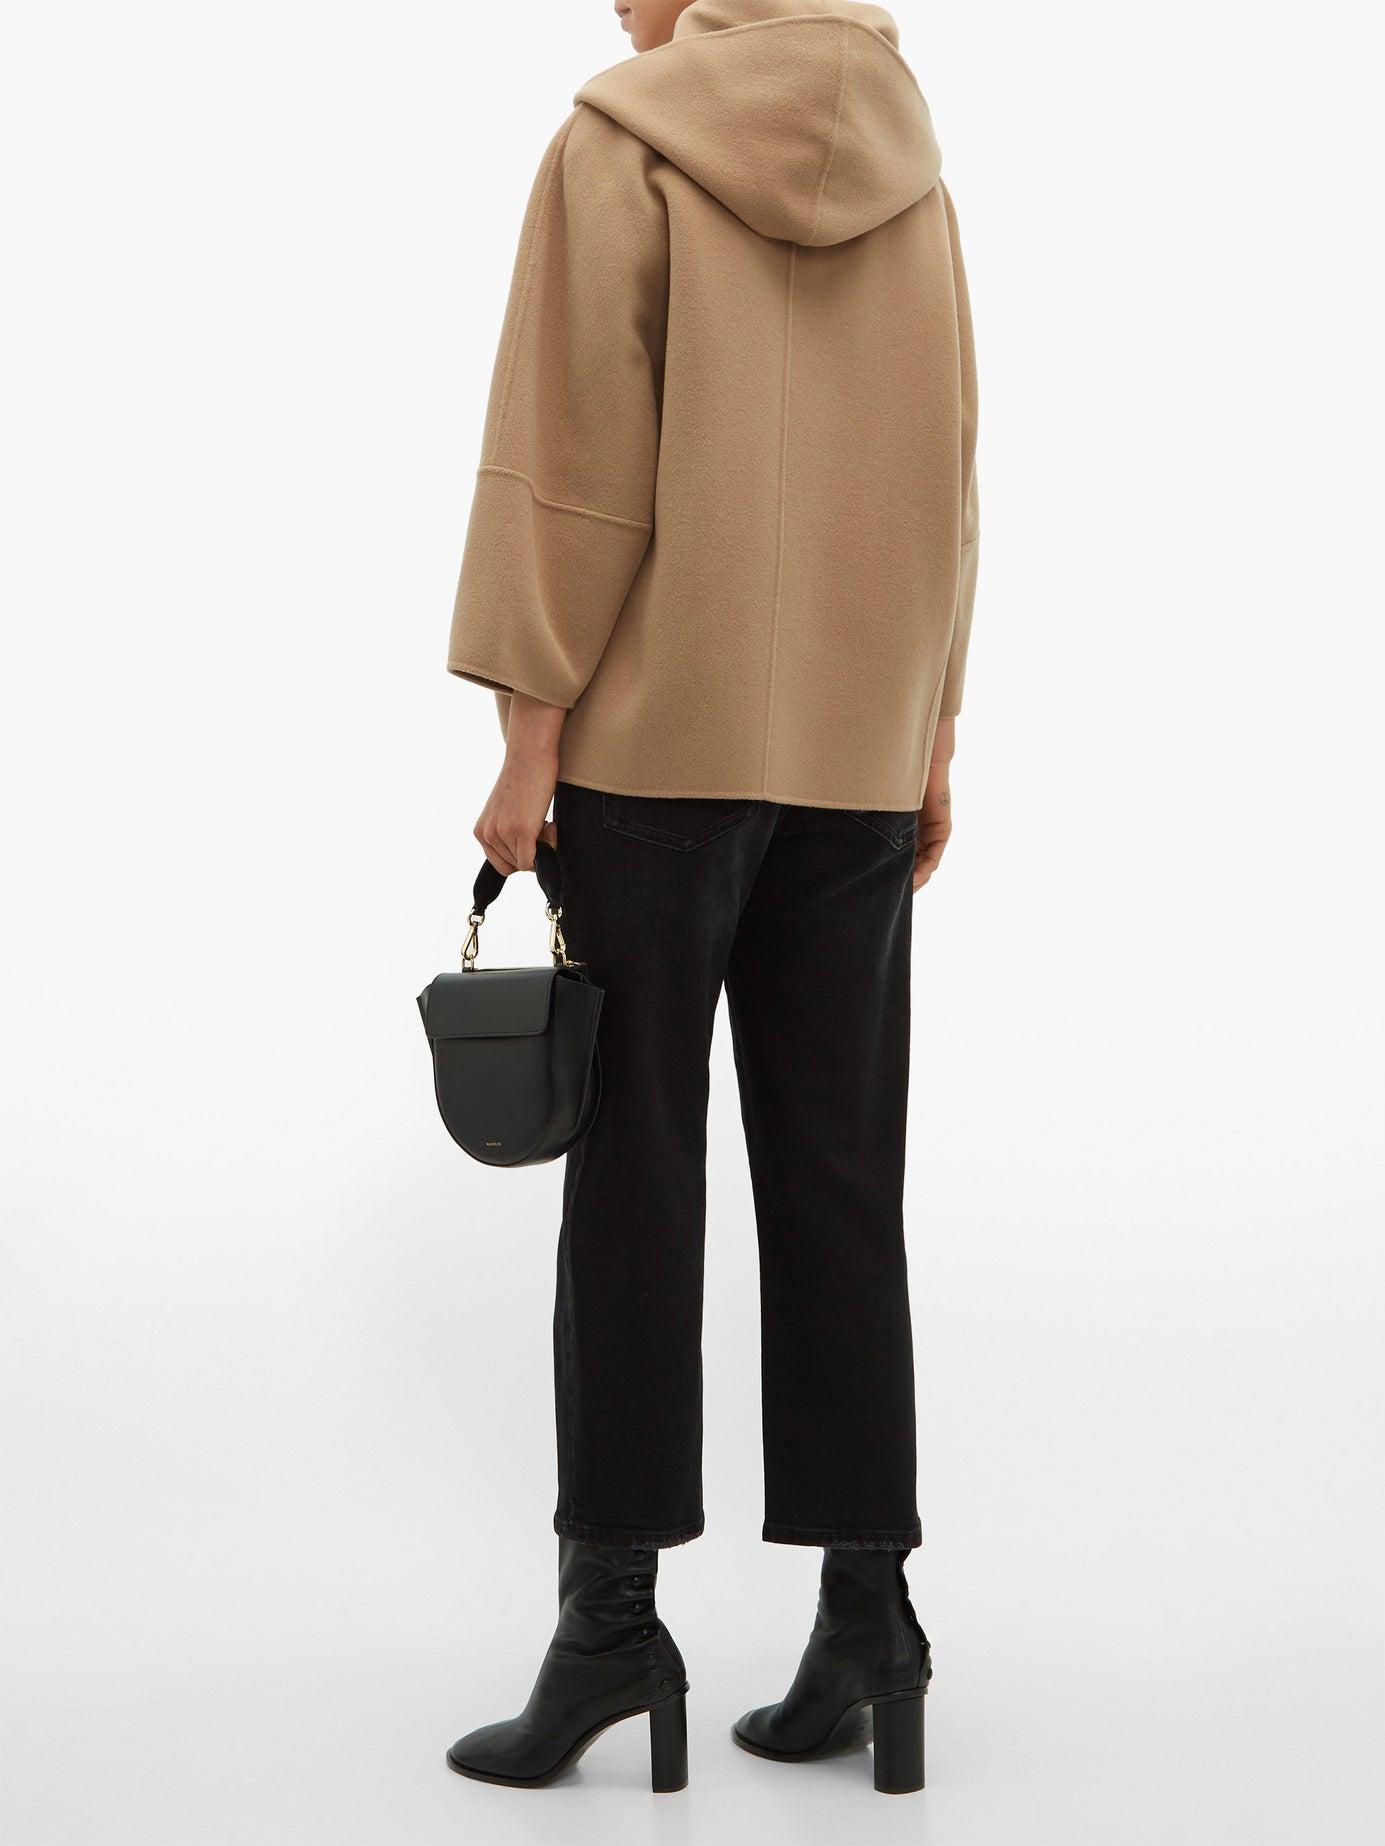 Weekend by Maxmara Falco Coat in Natural | Lyst